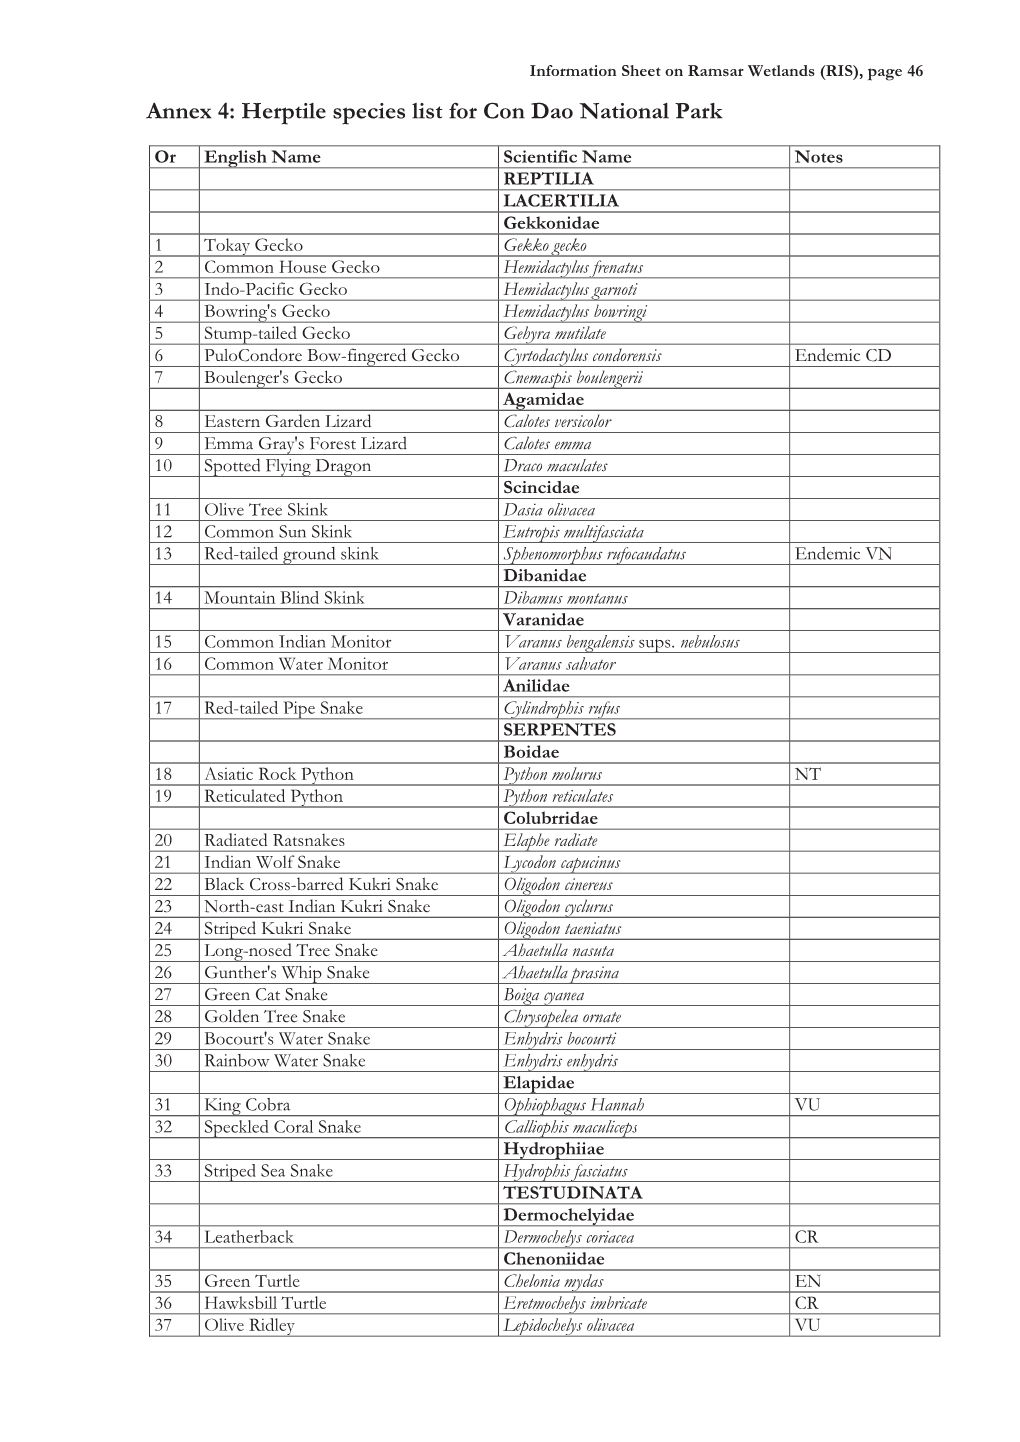 Information Sheet on Ramsar Wetlands (RIS), Page 46 Annex 4: Herptile Species List for Con Dao National Park